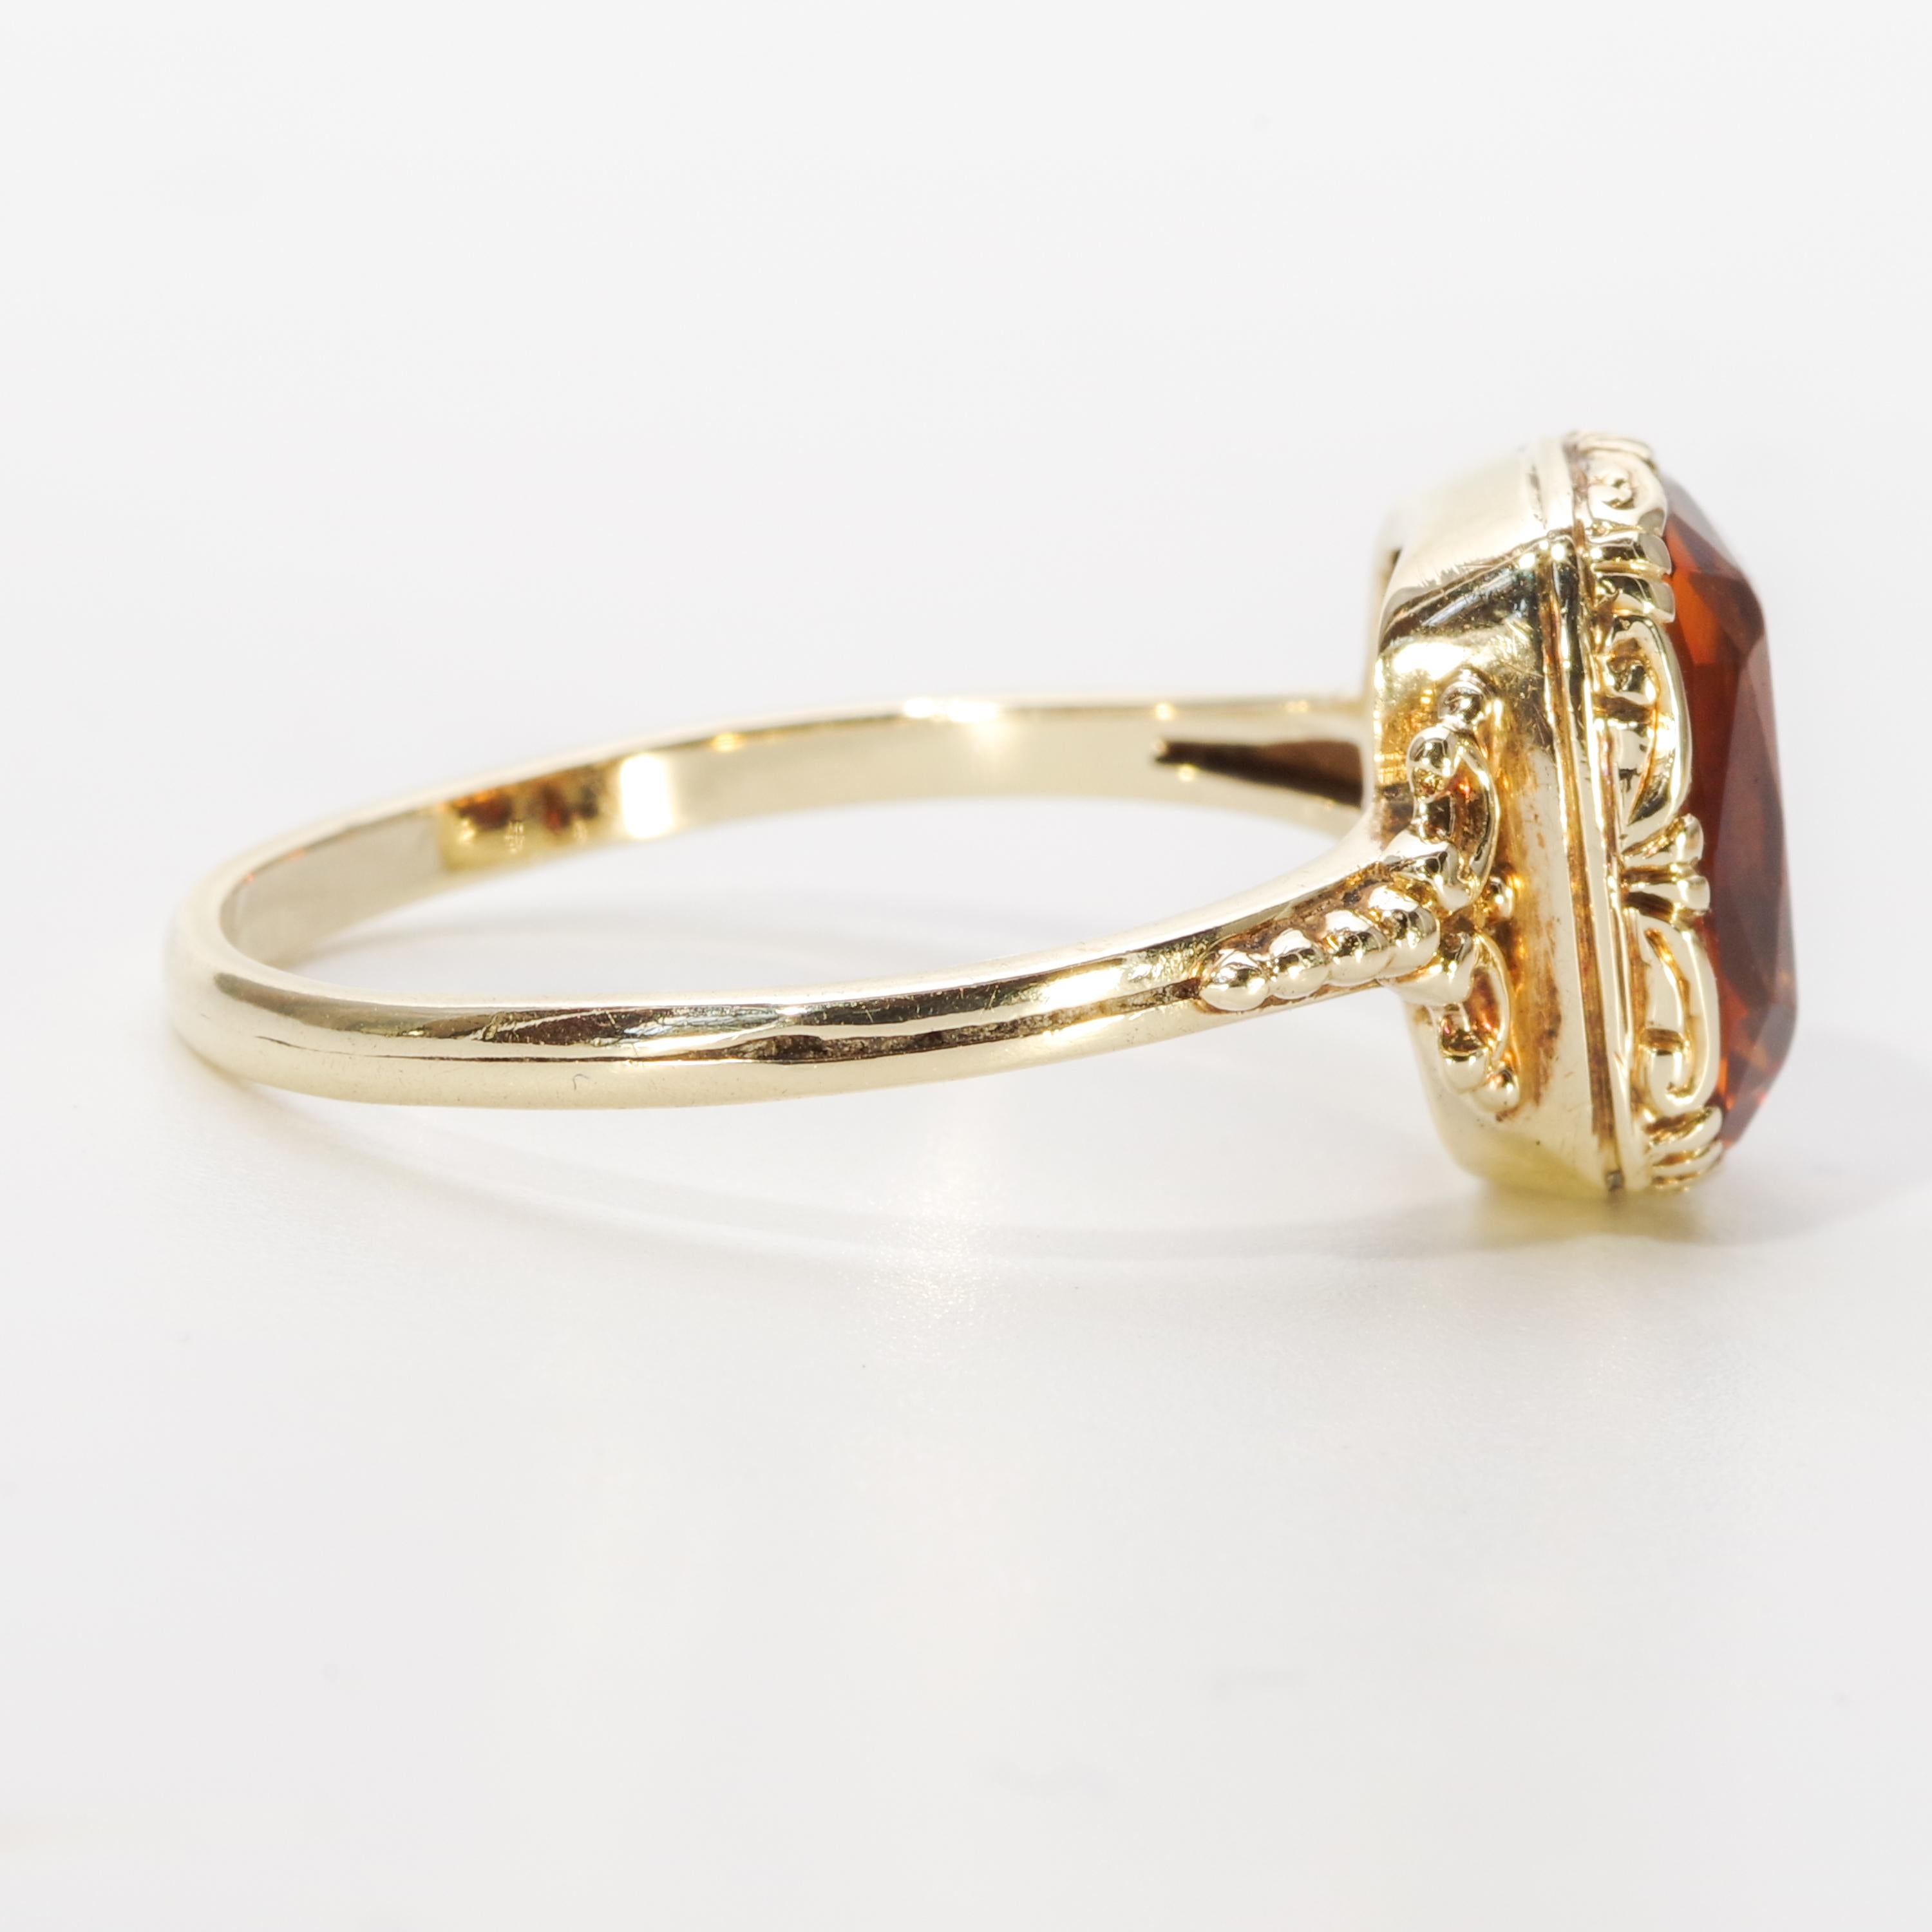 Women's or Men's Antique Madeira Citrine Gent's Ring from Europe